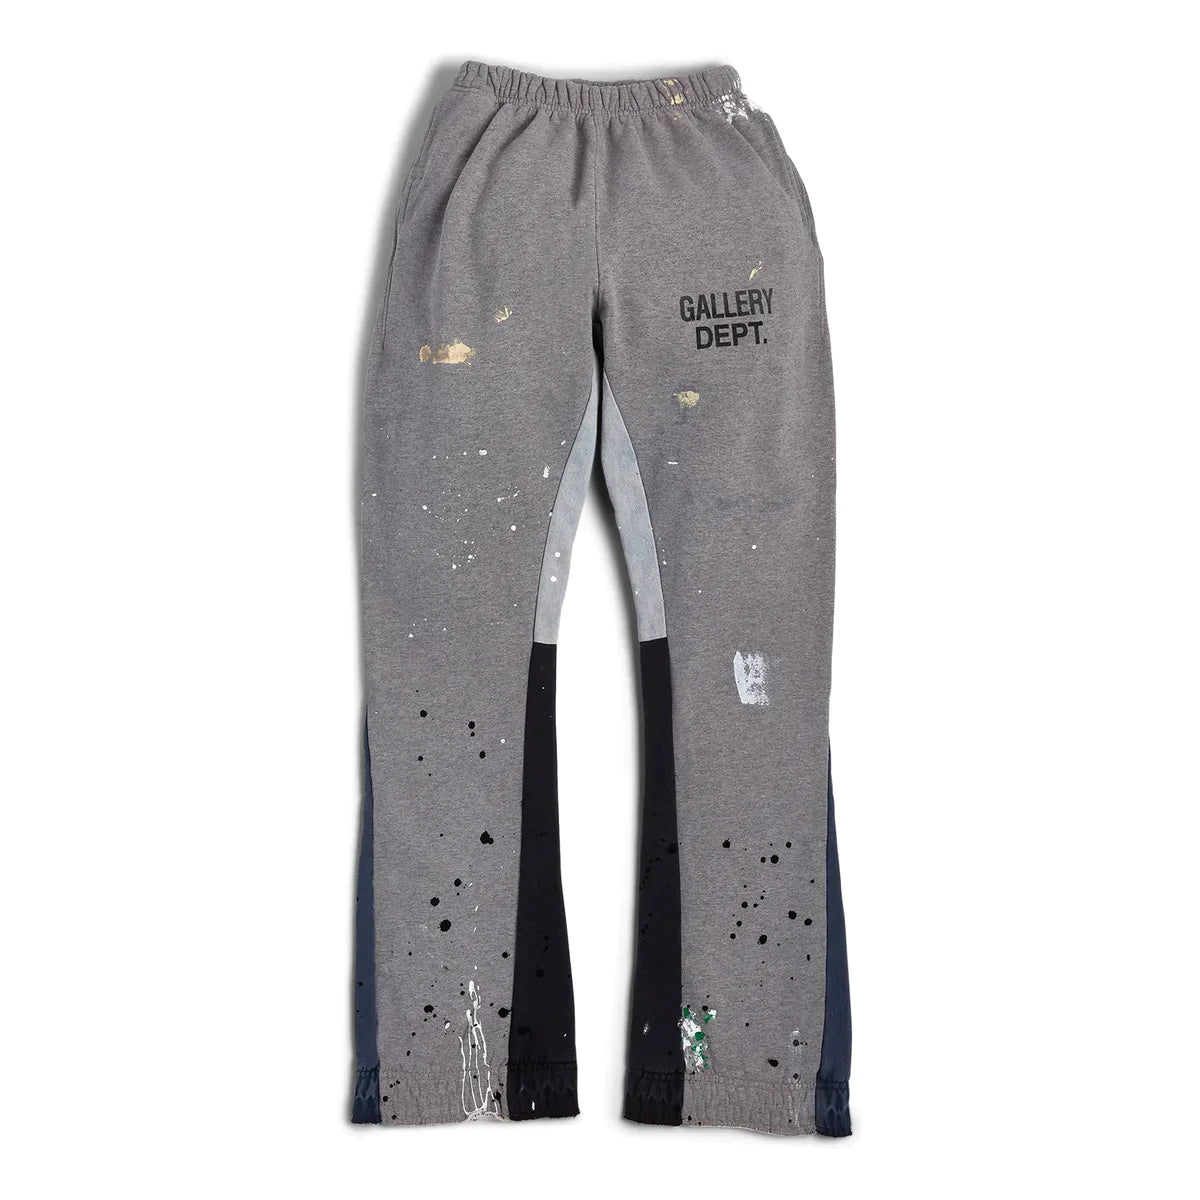 Gallery Dept. Painted Flare Sweat Pants Grey